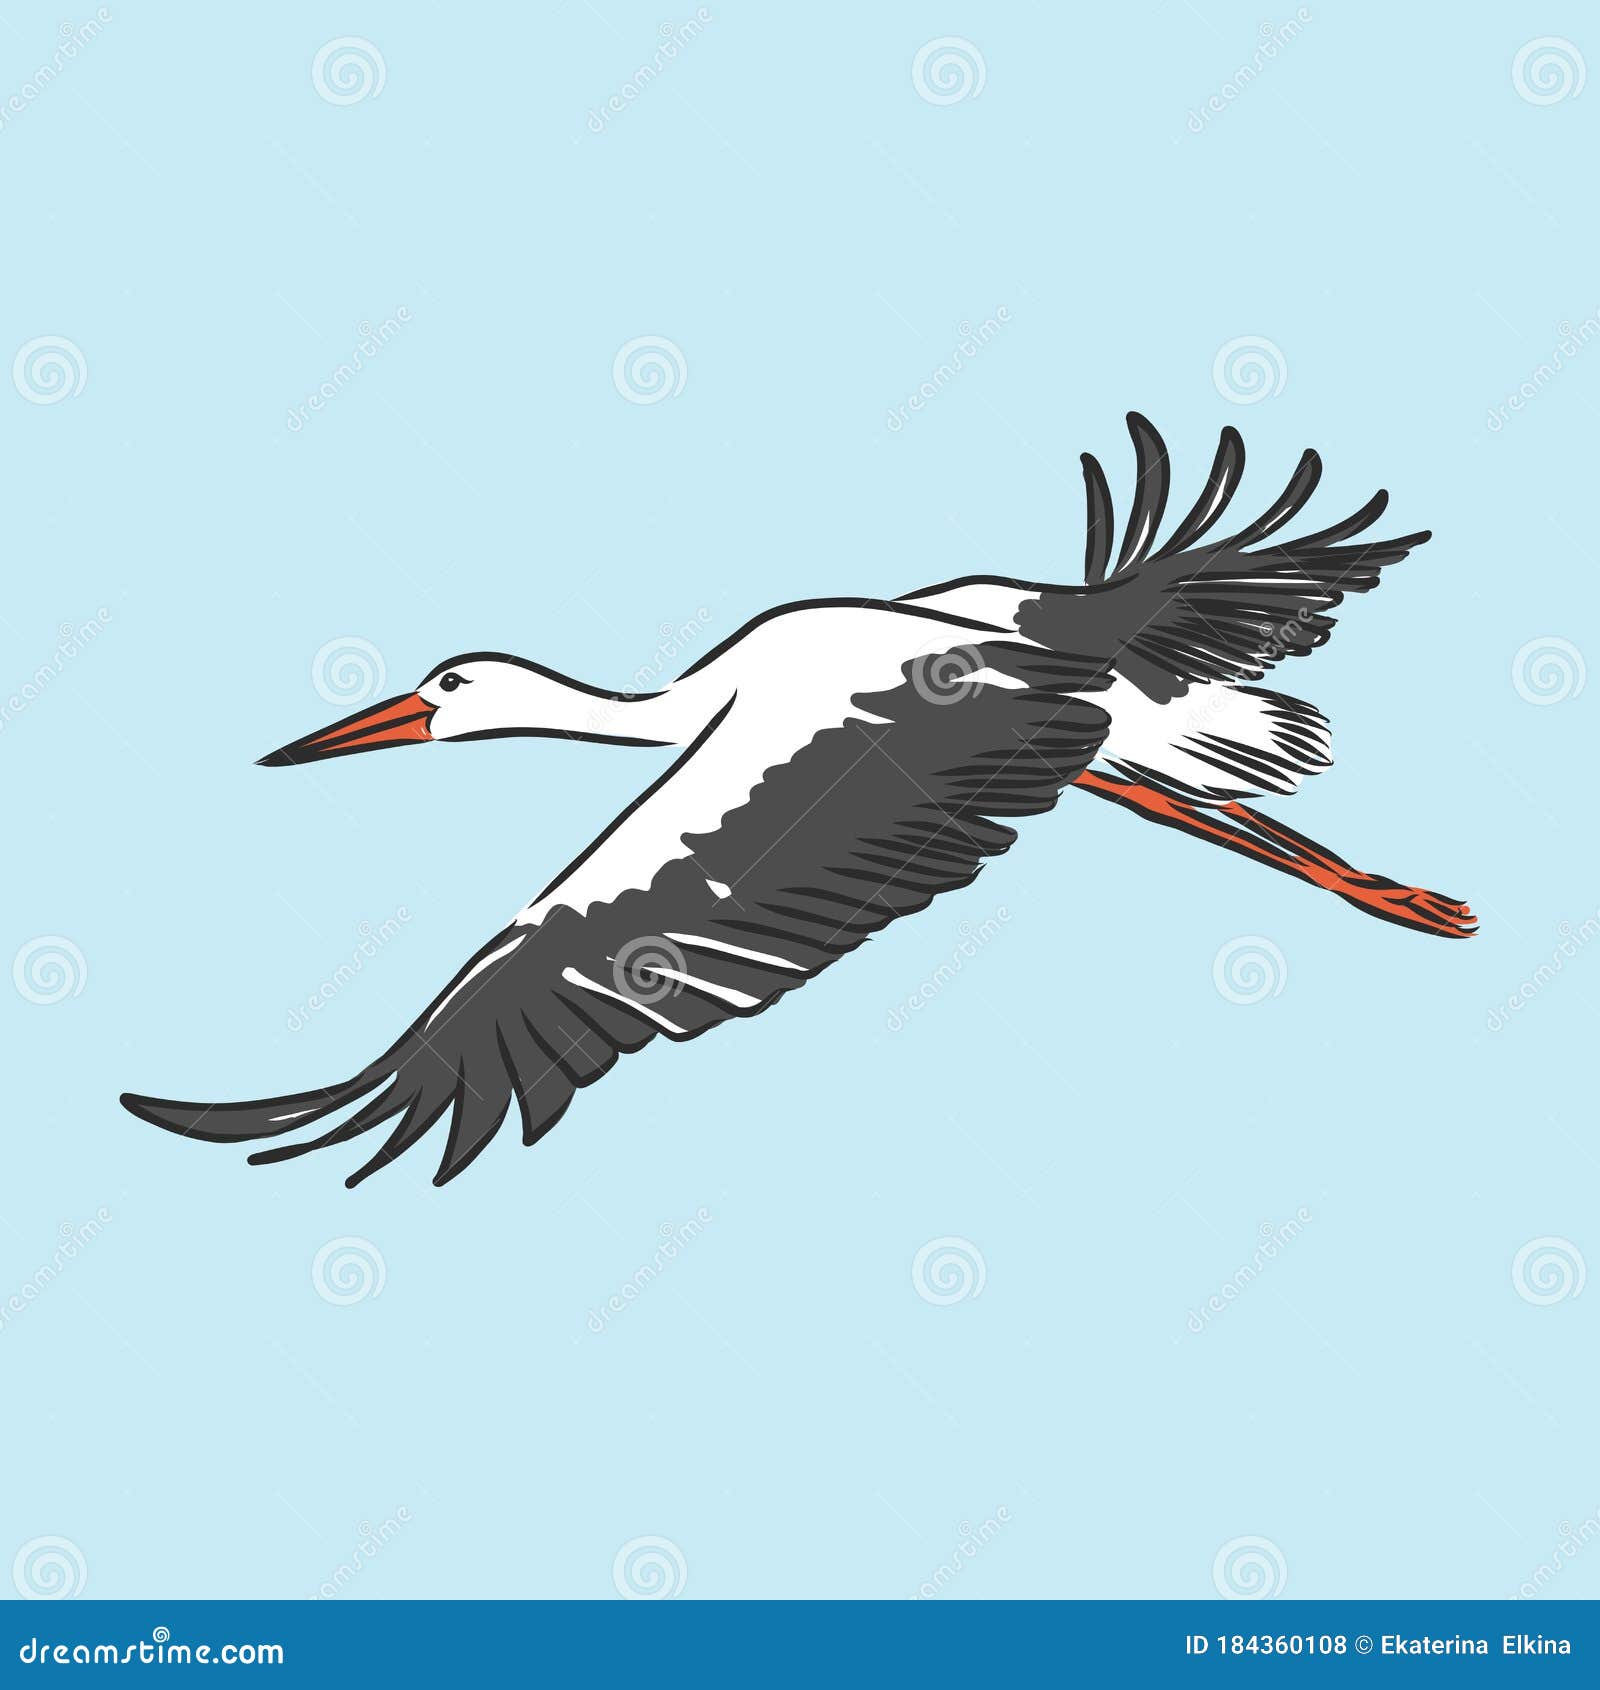 Learn How to Draw a Wood Stork (Birds) Step by Step : Drawing Tutorials